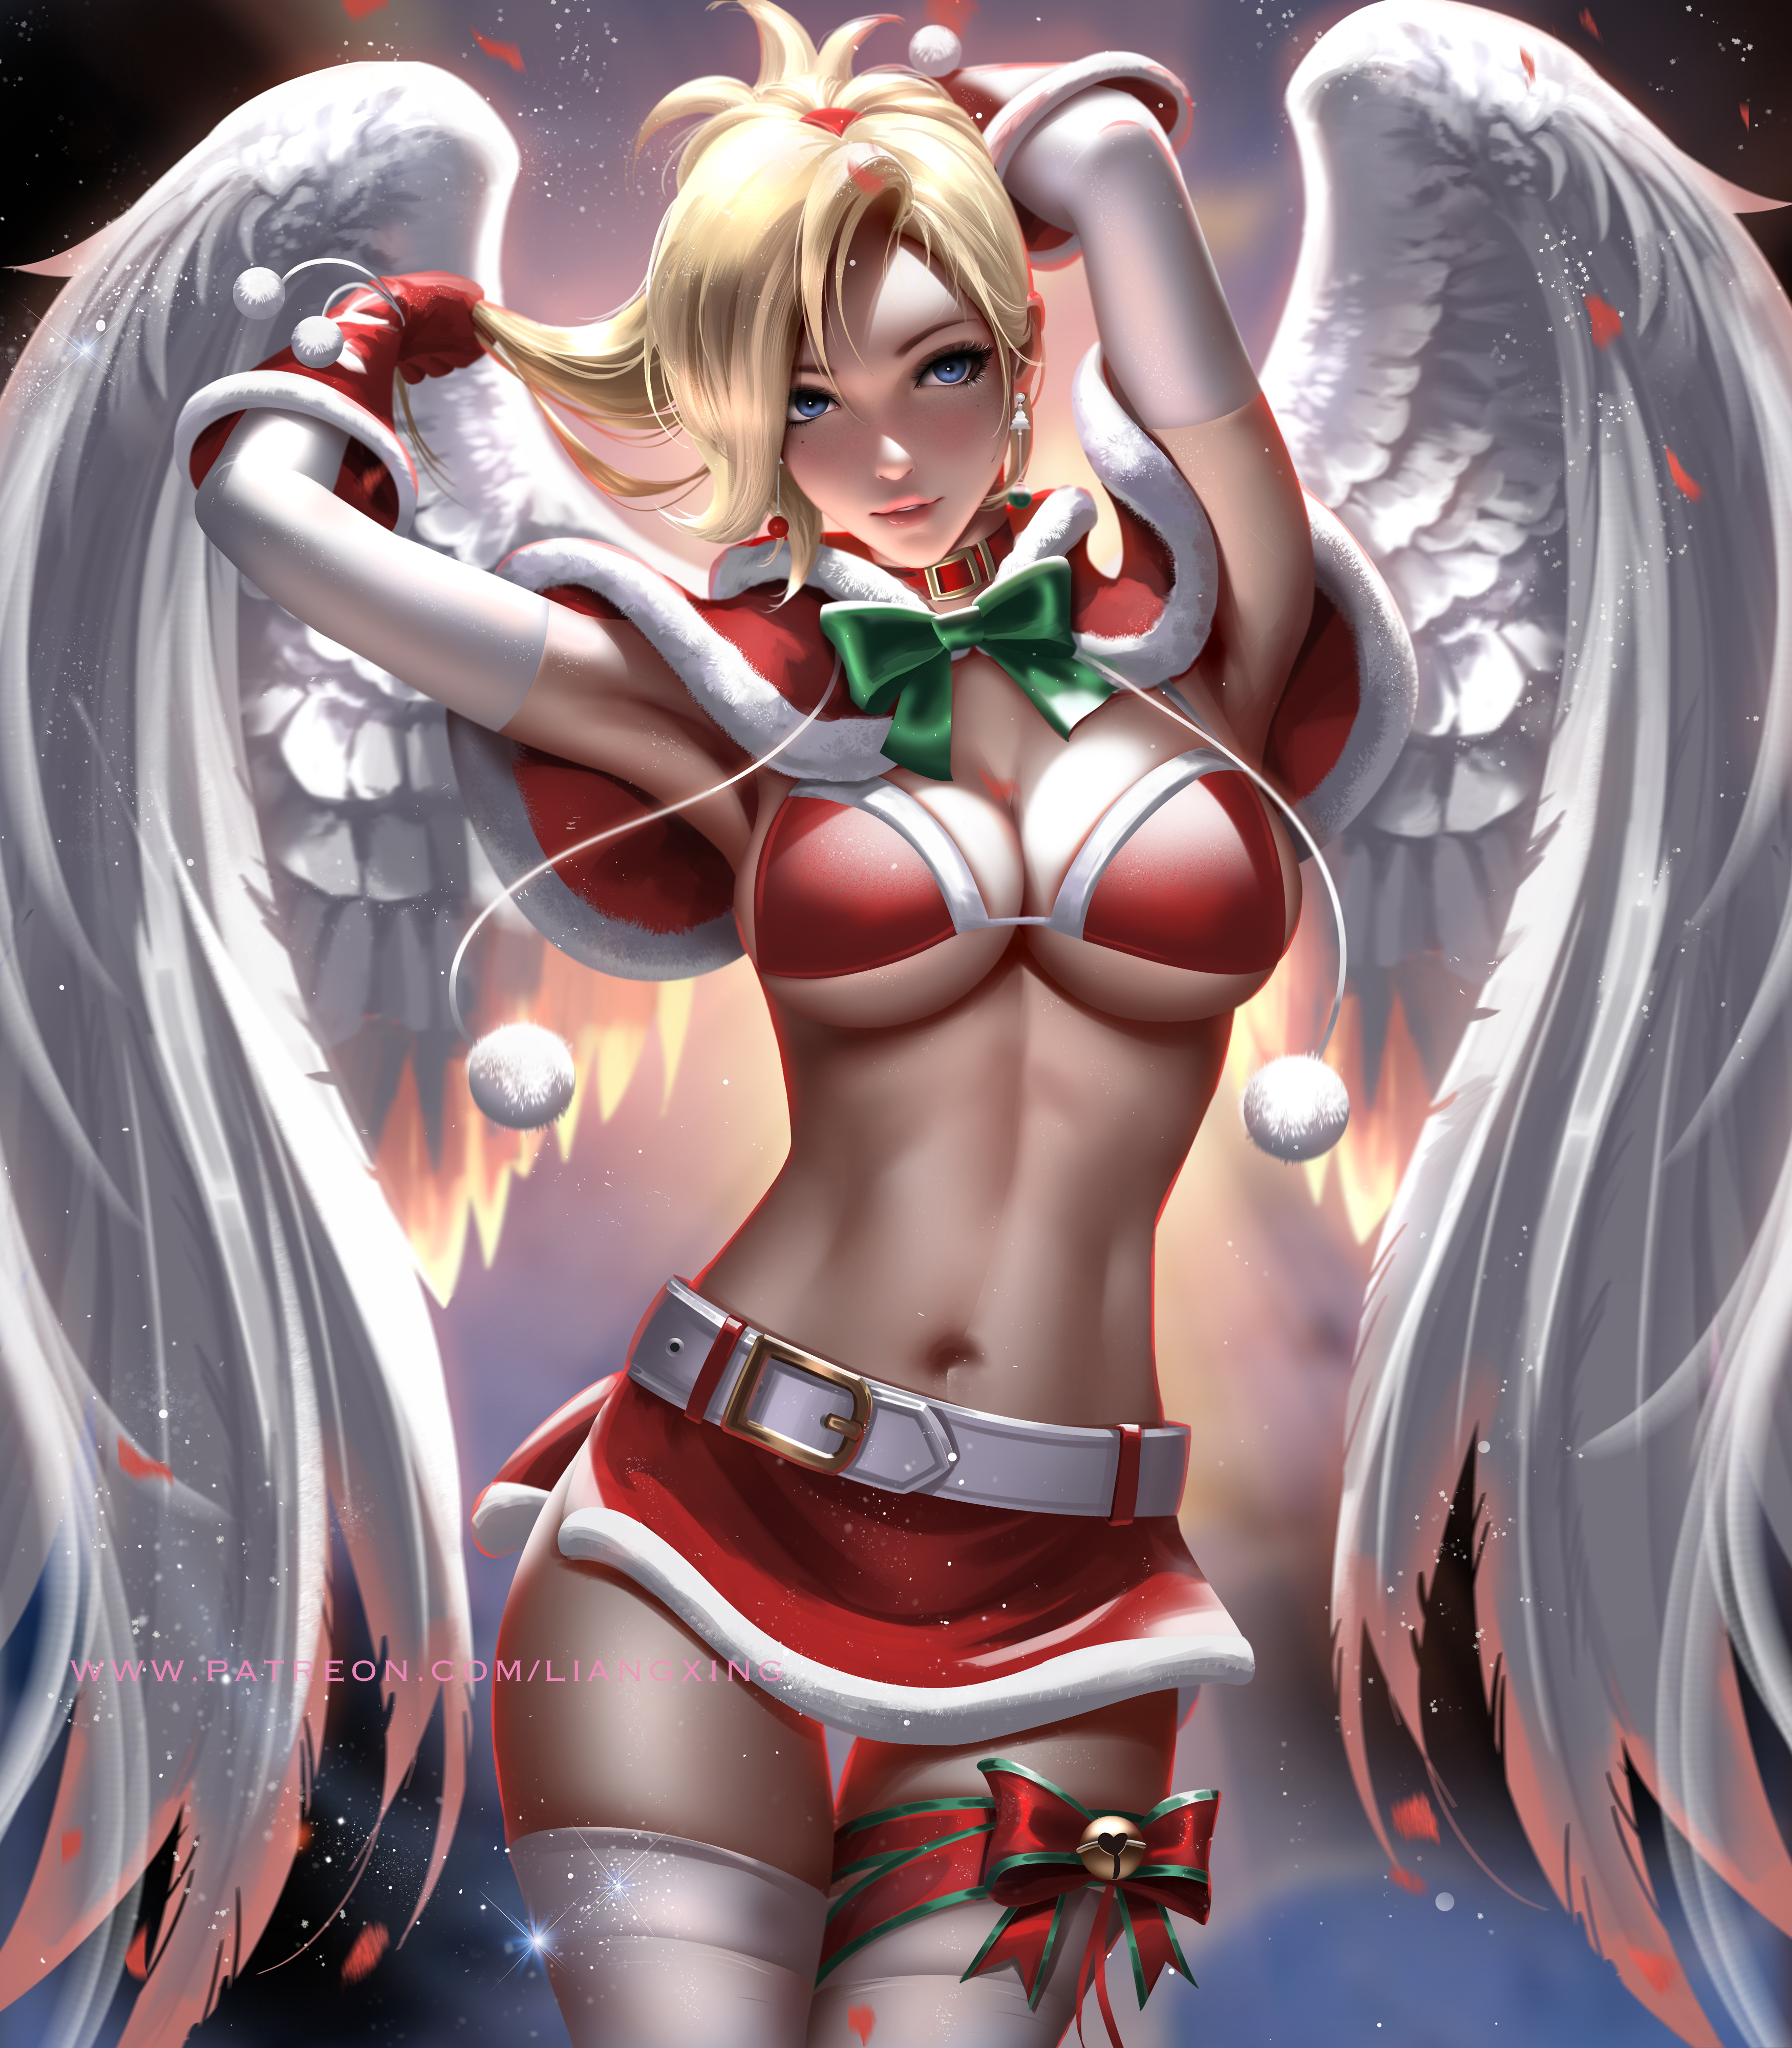 General 3500x4000 Mercy (Overwatch) Overwatch video games video game characters fantasy girl blonde looking at viewer blue eyes collar ribbon santa outfit Santa girl bra underboob belly miniskirt belt the gap stockings white stockings sparks depth of field wings feathers portrait display frontal view Christmas artwork illustration digital art drawing fan art Jason Liang gloves elbow gloves